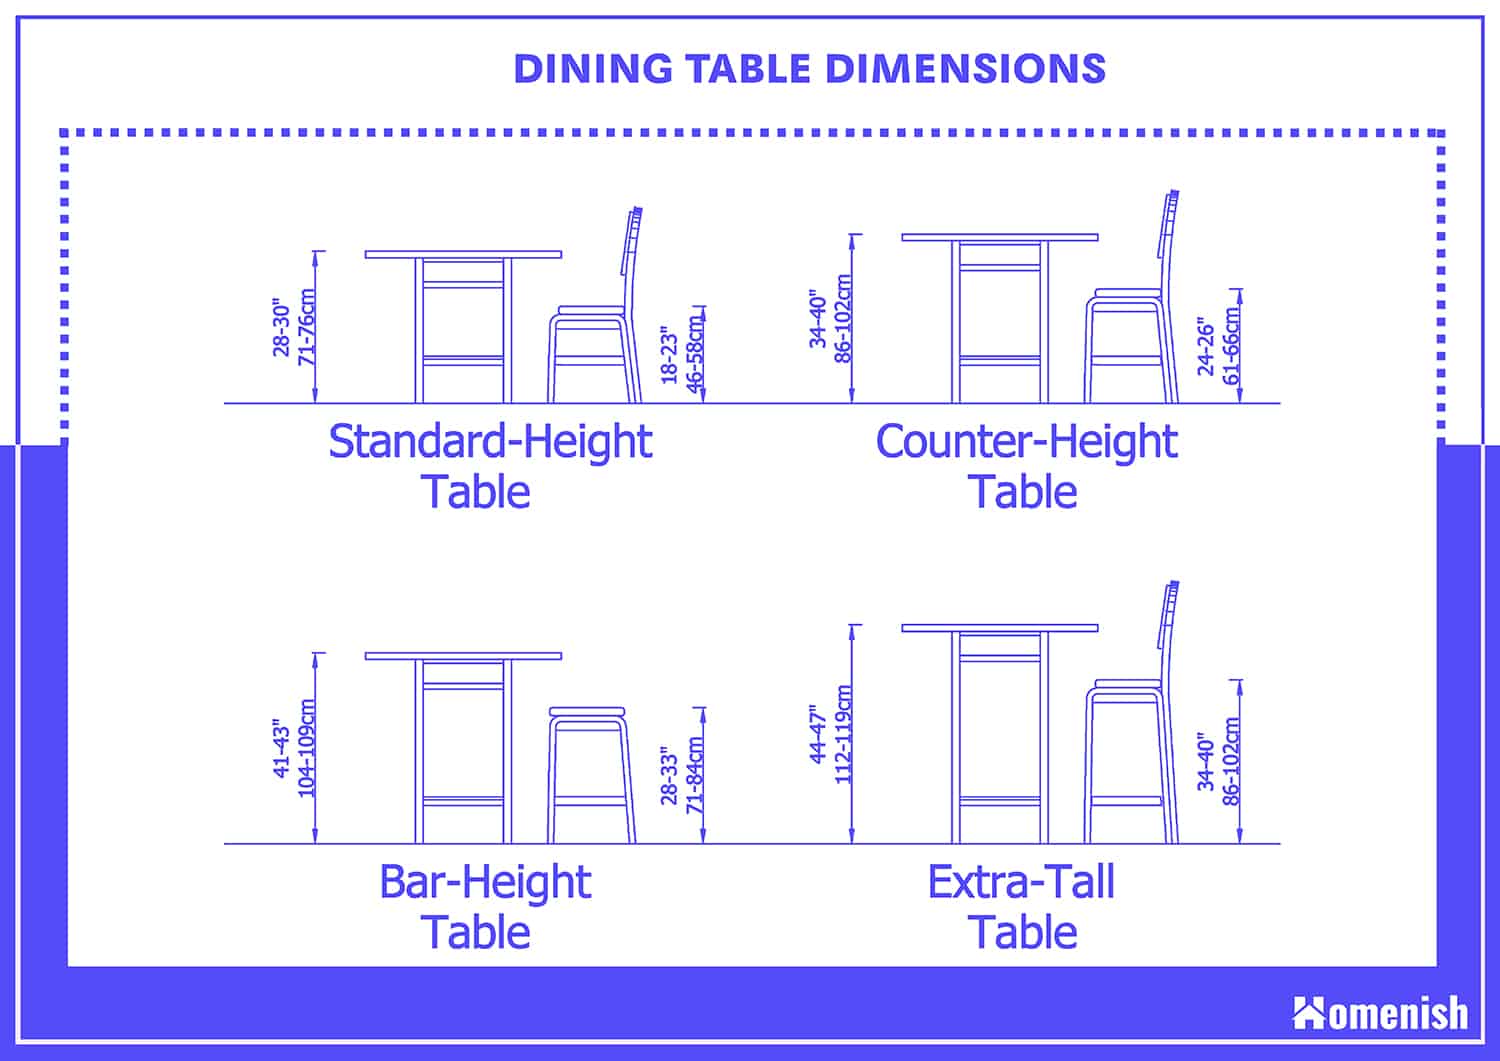 Standard Dining Table Dimensions, Dining Room Table Standard Dimensions